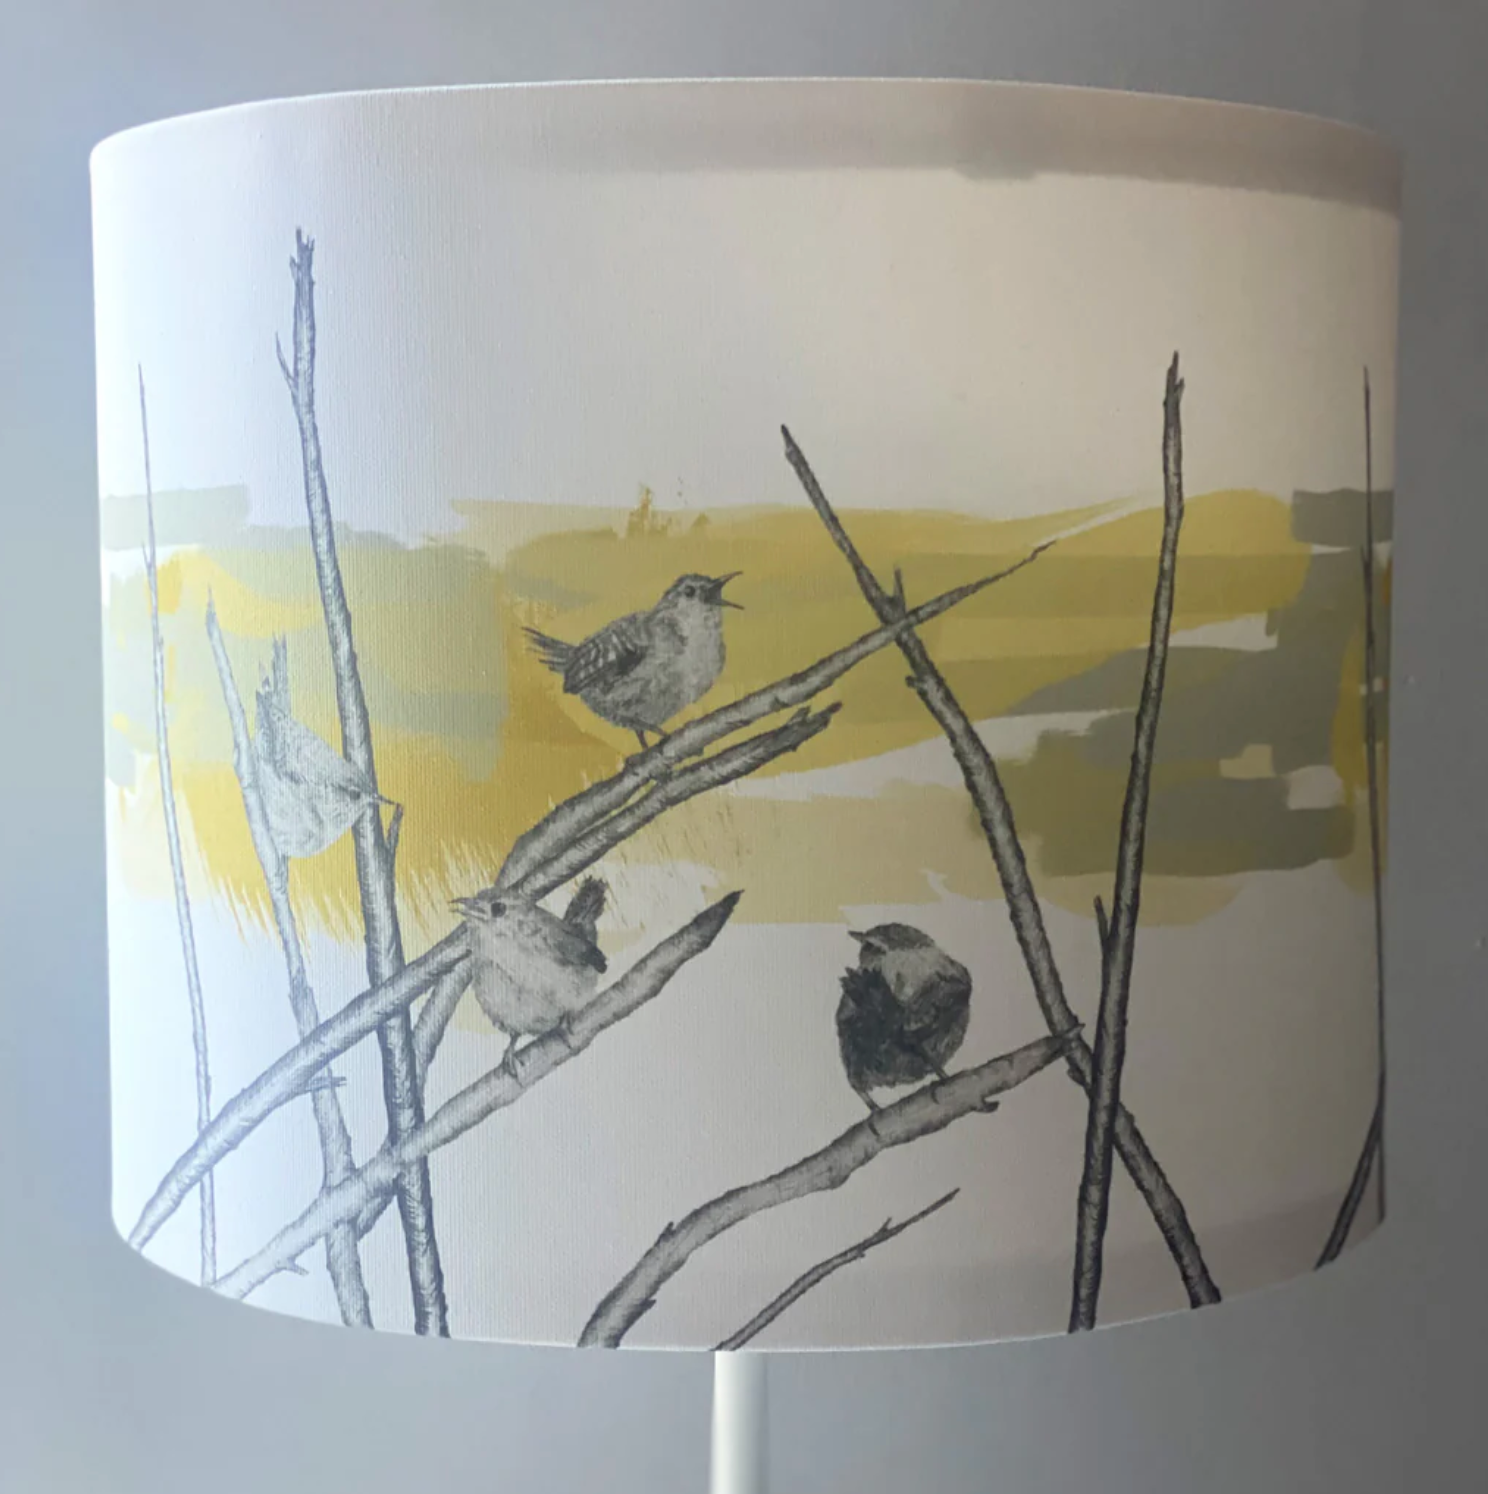 Small Lampshade - several designs available